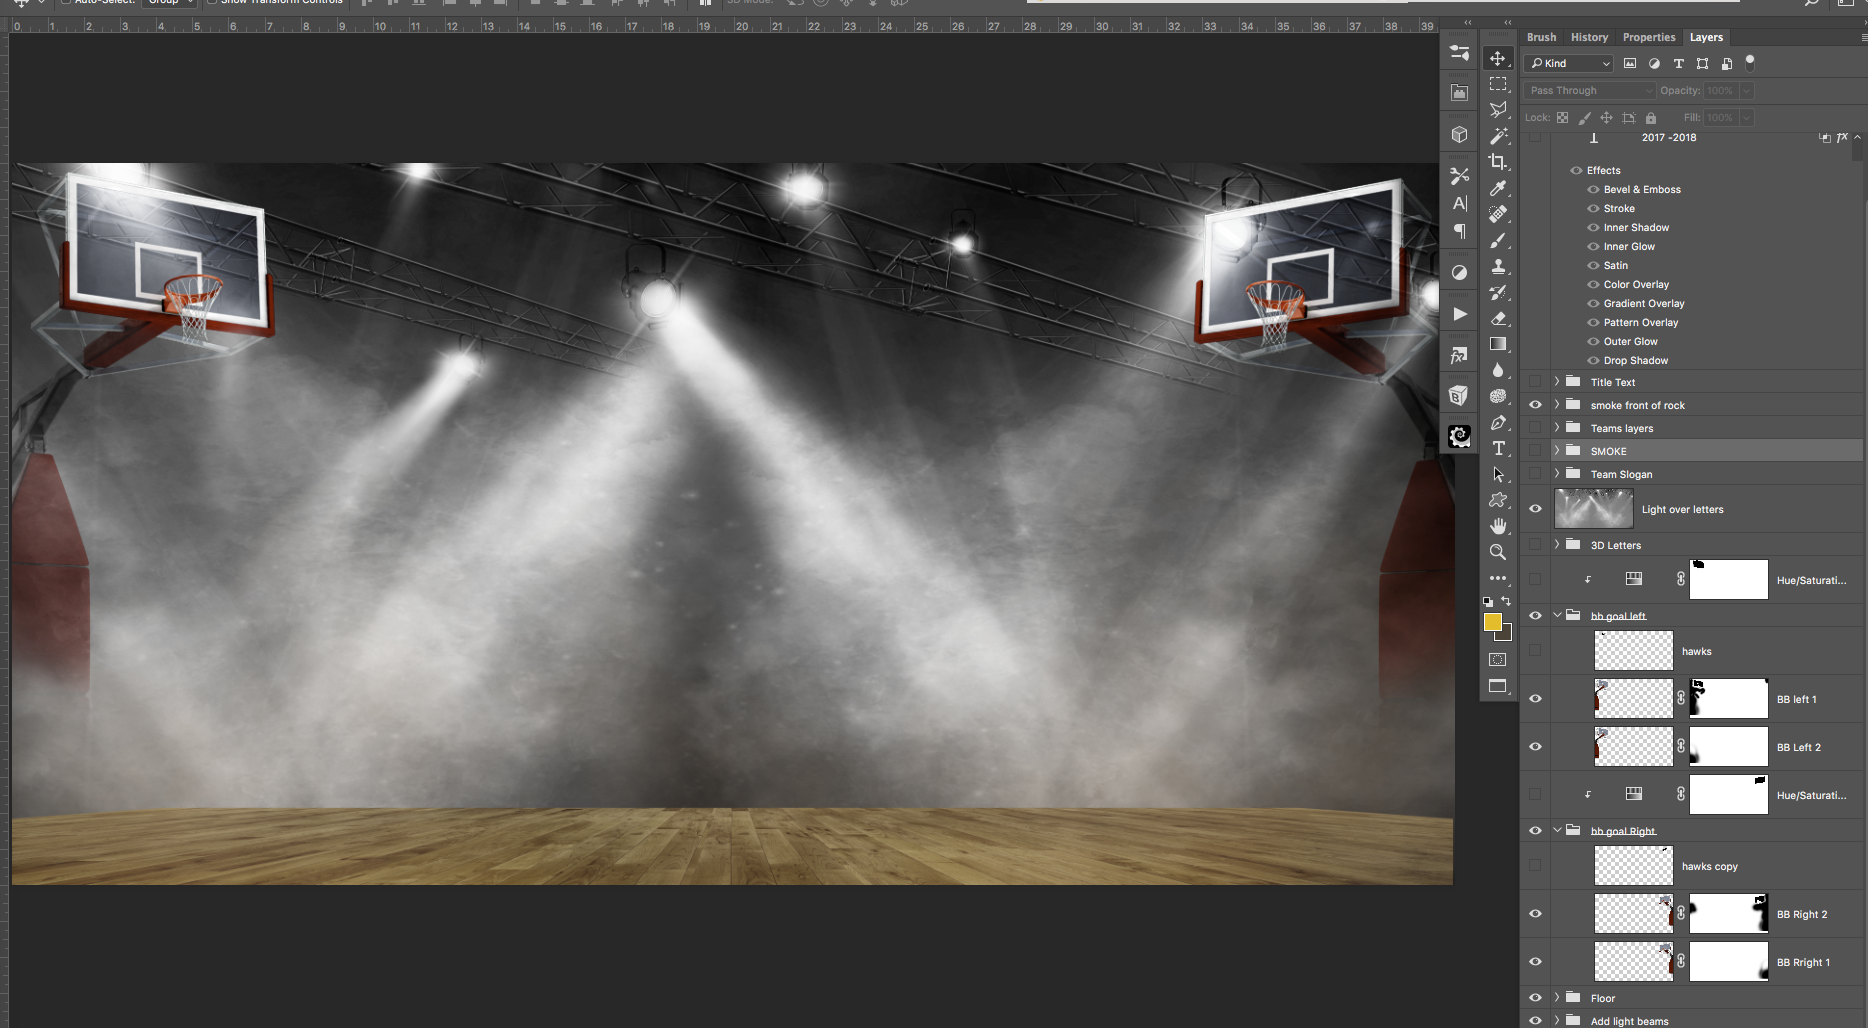 basketball backgrounds for photoshop